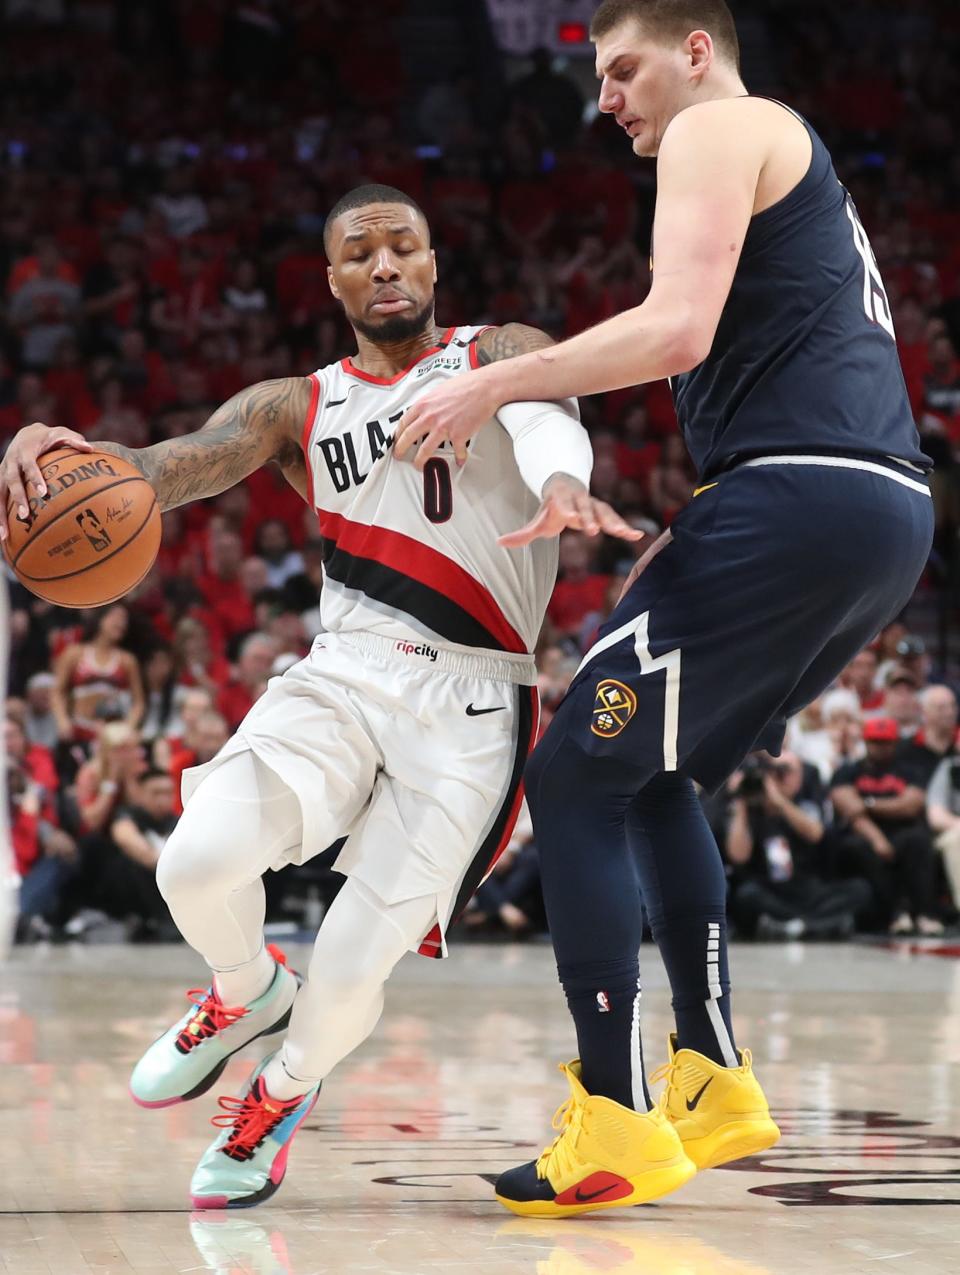 Trail Blazers guard Damian Lillard (0) and Nuggets center Nikola Jokic could be part of the NBA's 100th anniversary team.